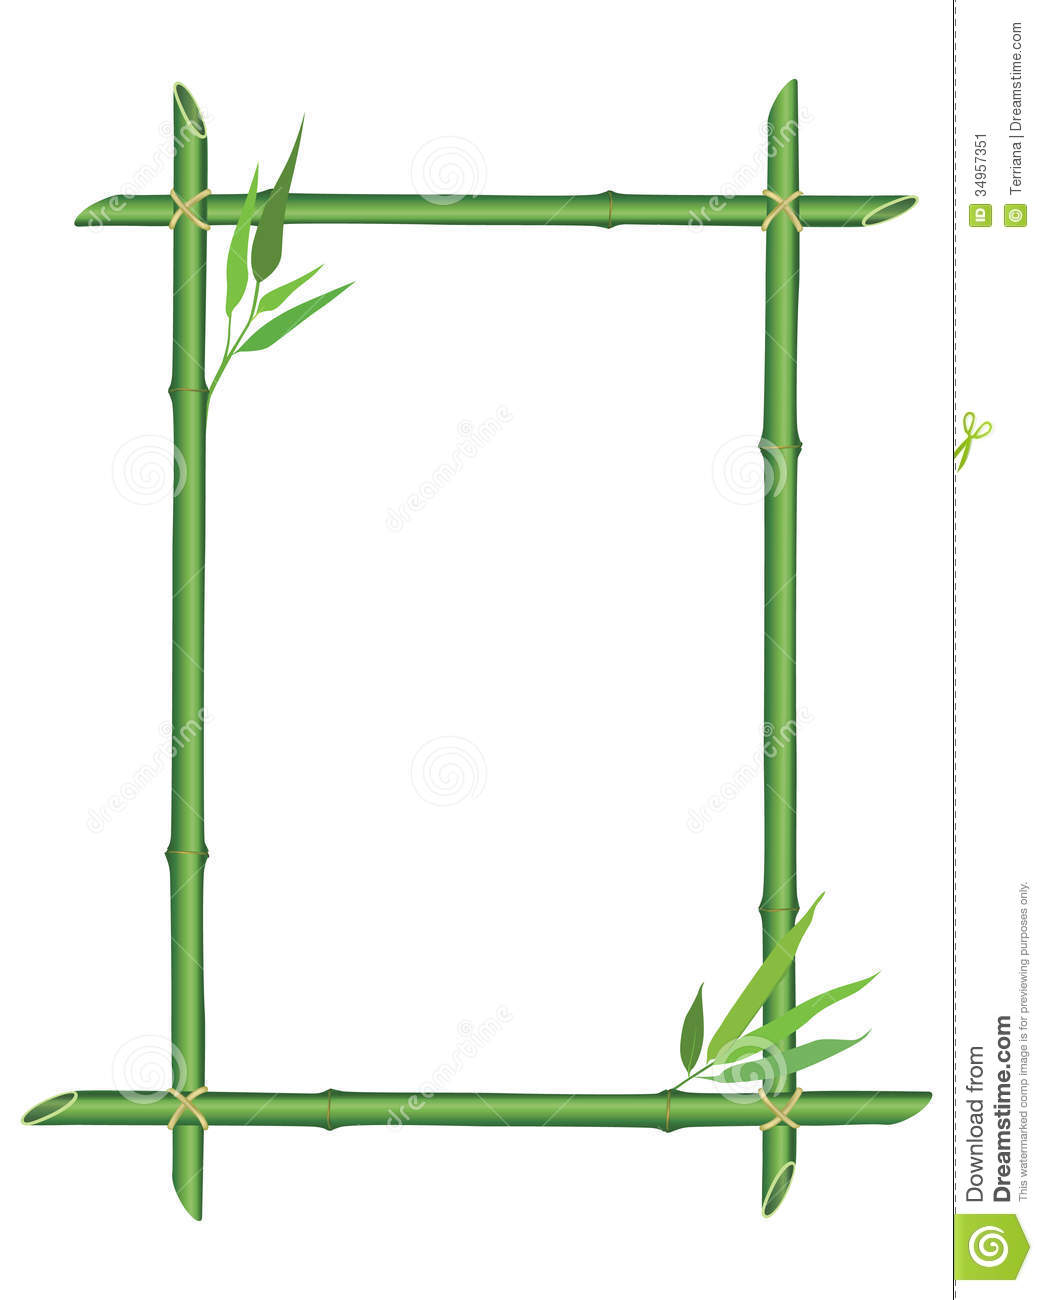 Bamboo Border Floral With Leaves Stem And Copy Space